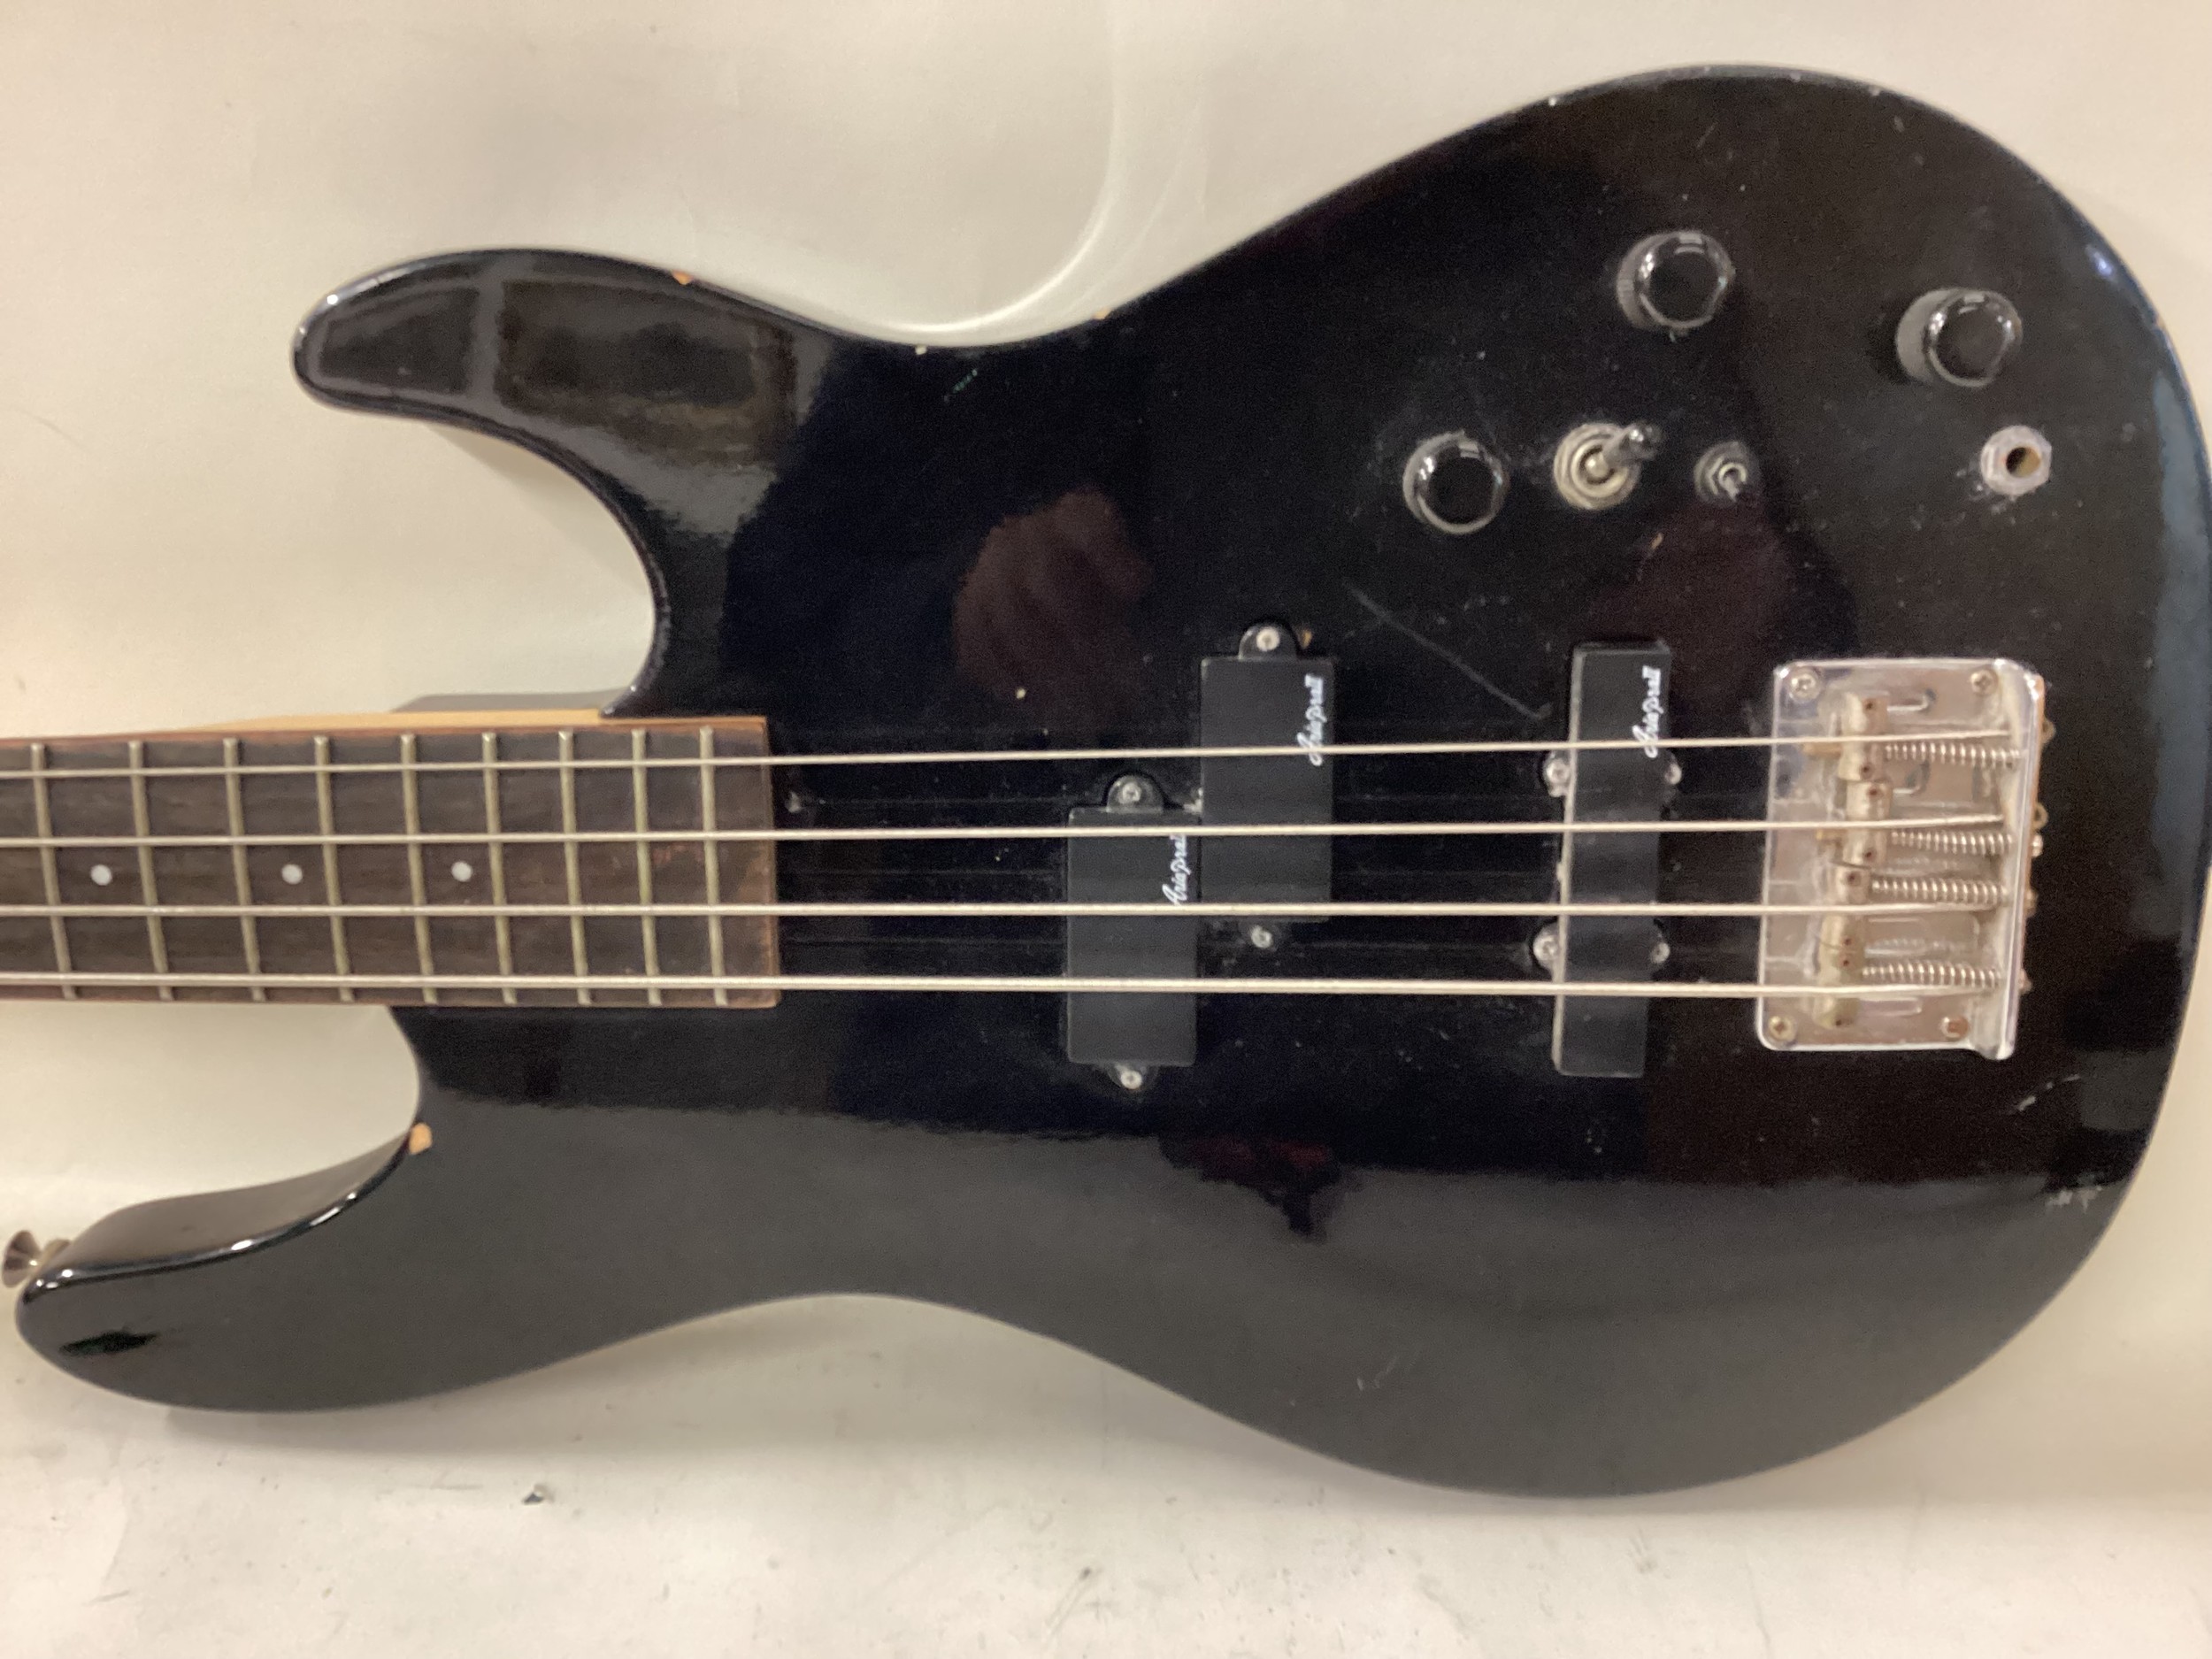 ARIA PRO II SLB-2A BASS GUITAR. 1990s Aria Pro II SLB-2 bass guitar with Body finished in black. - Image 3 of 6